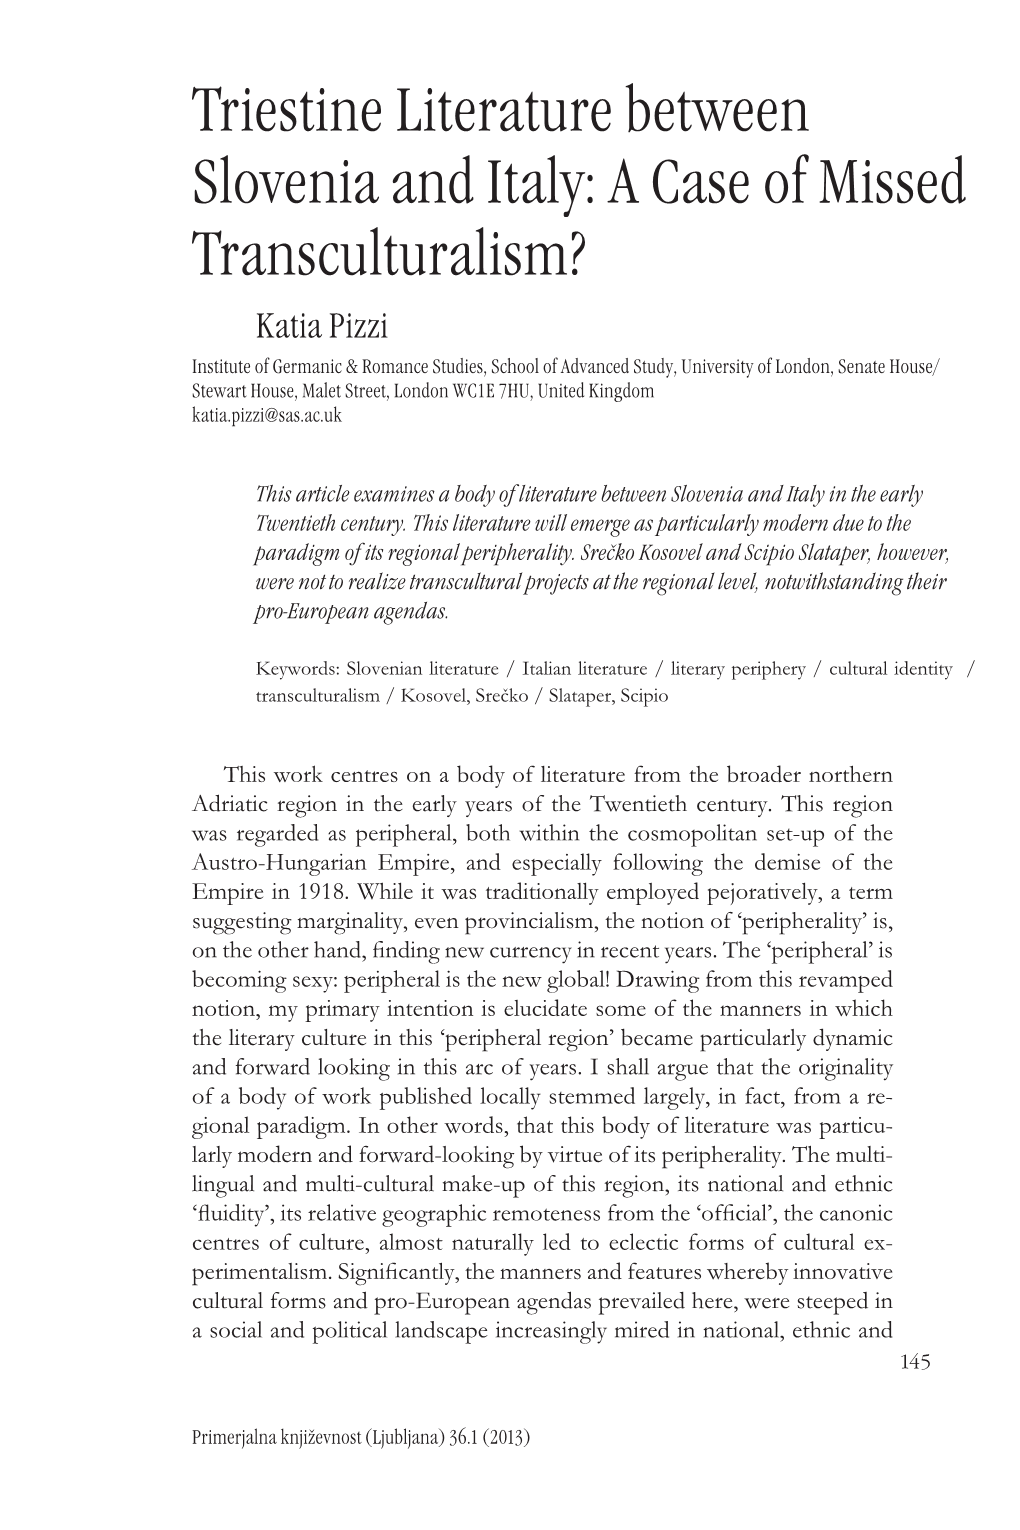 Triestine Literature Between Slovenia and Italy: a Case of Missed Transculturalism?